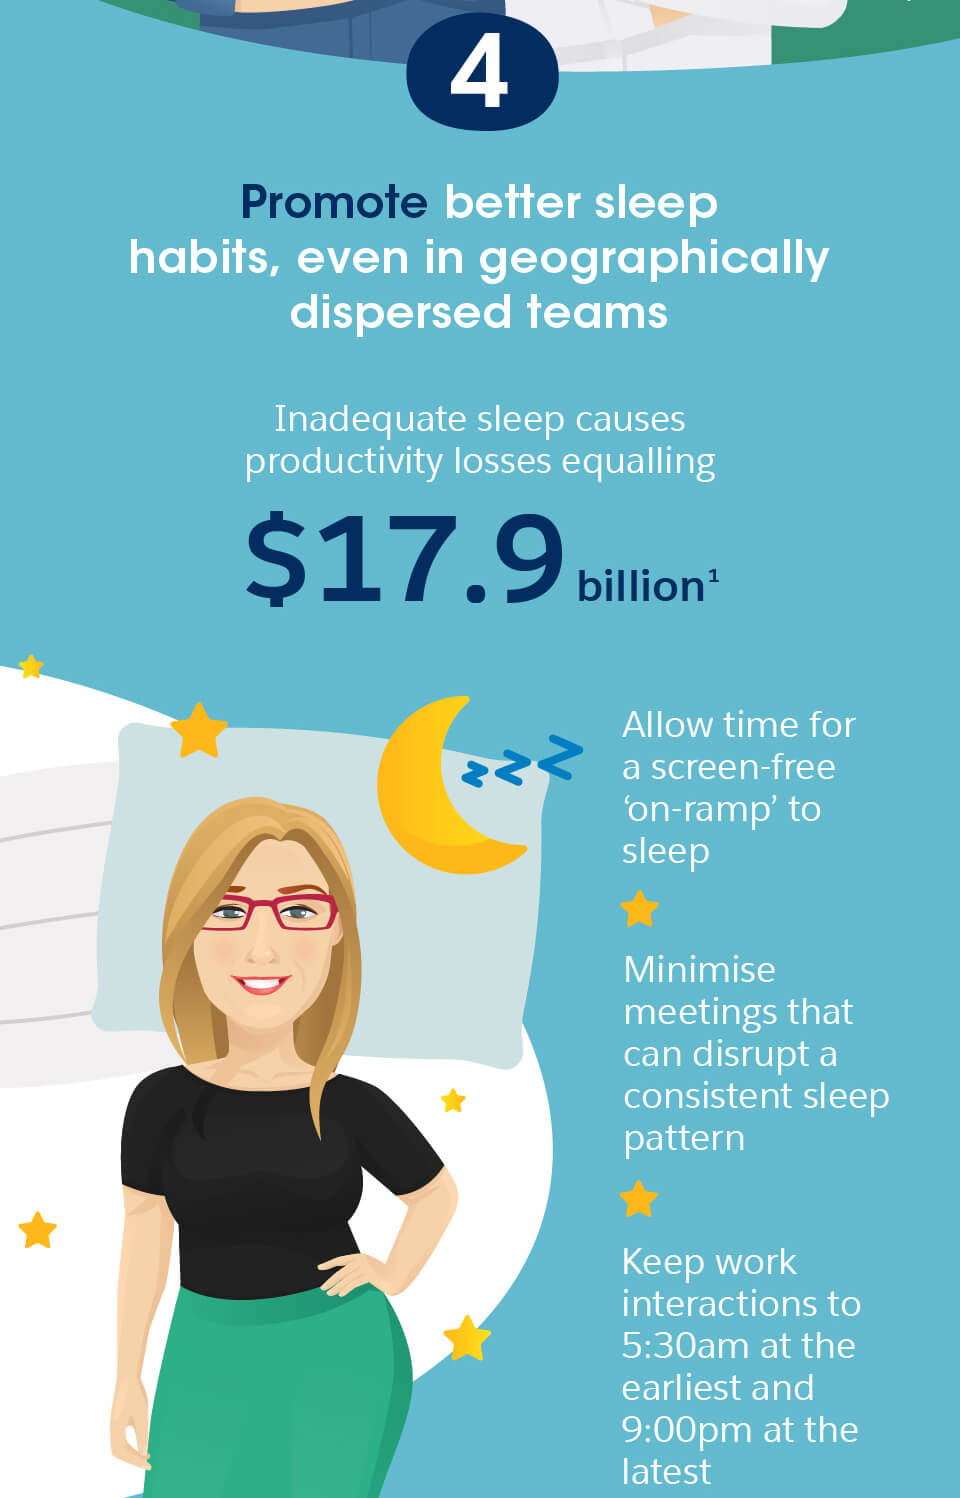 Promote better sleep habits, even in geographically dispersed teams